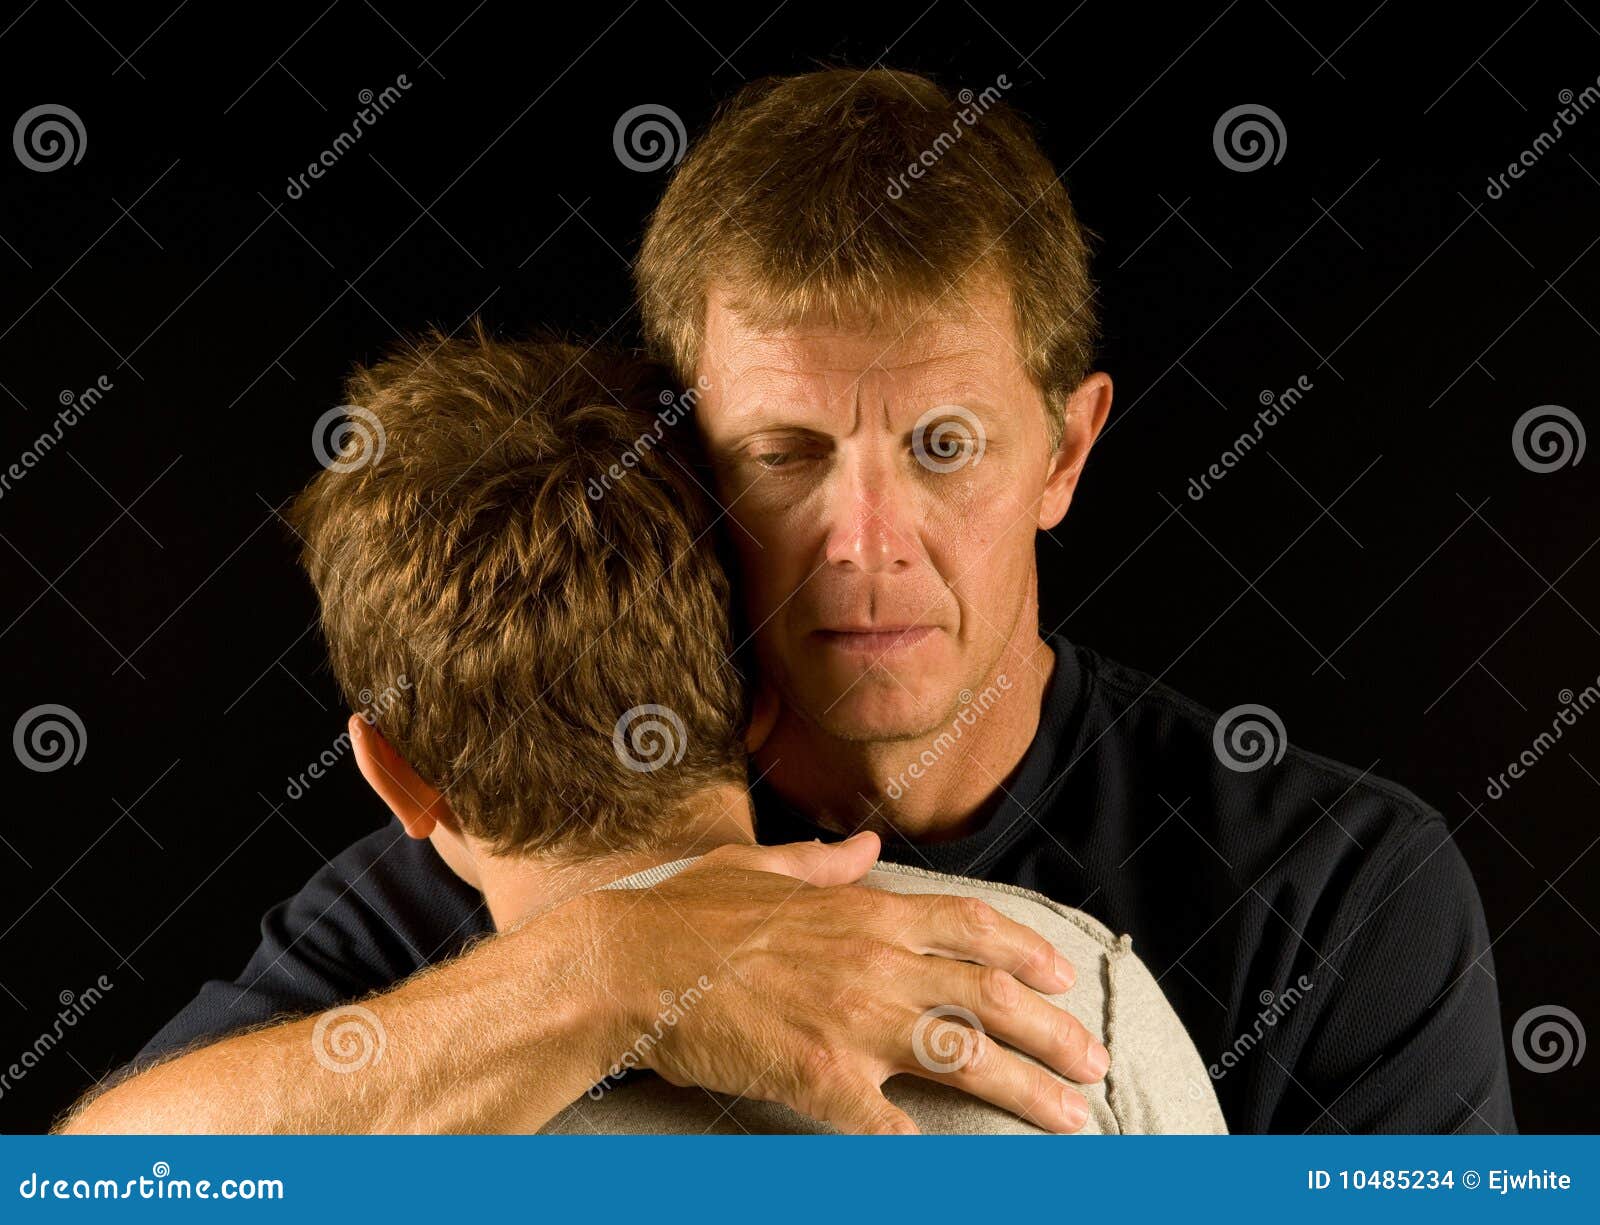 father, crying, hugs son